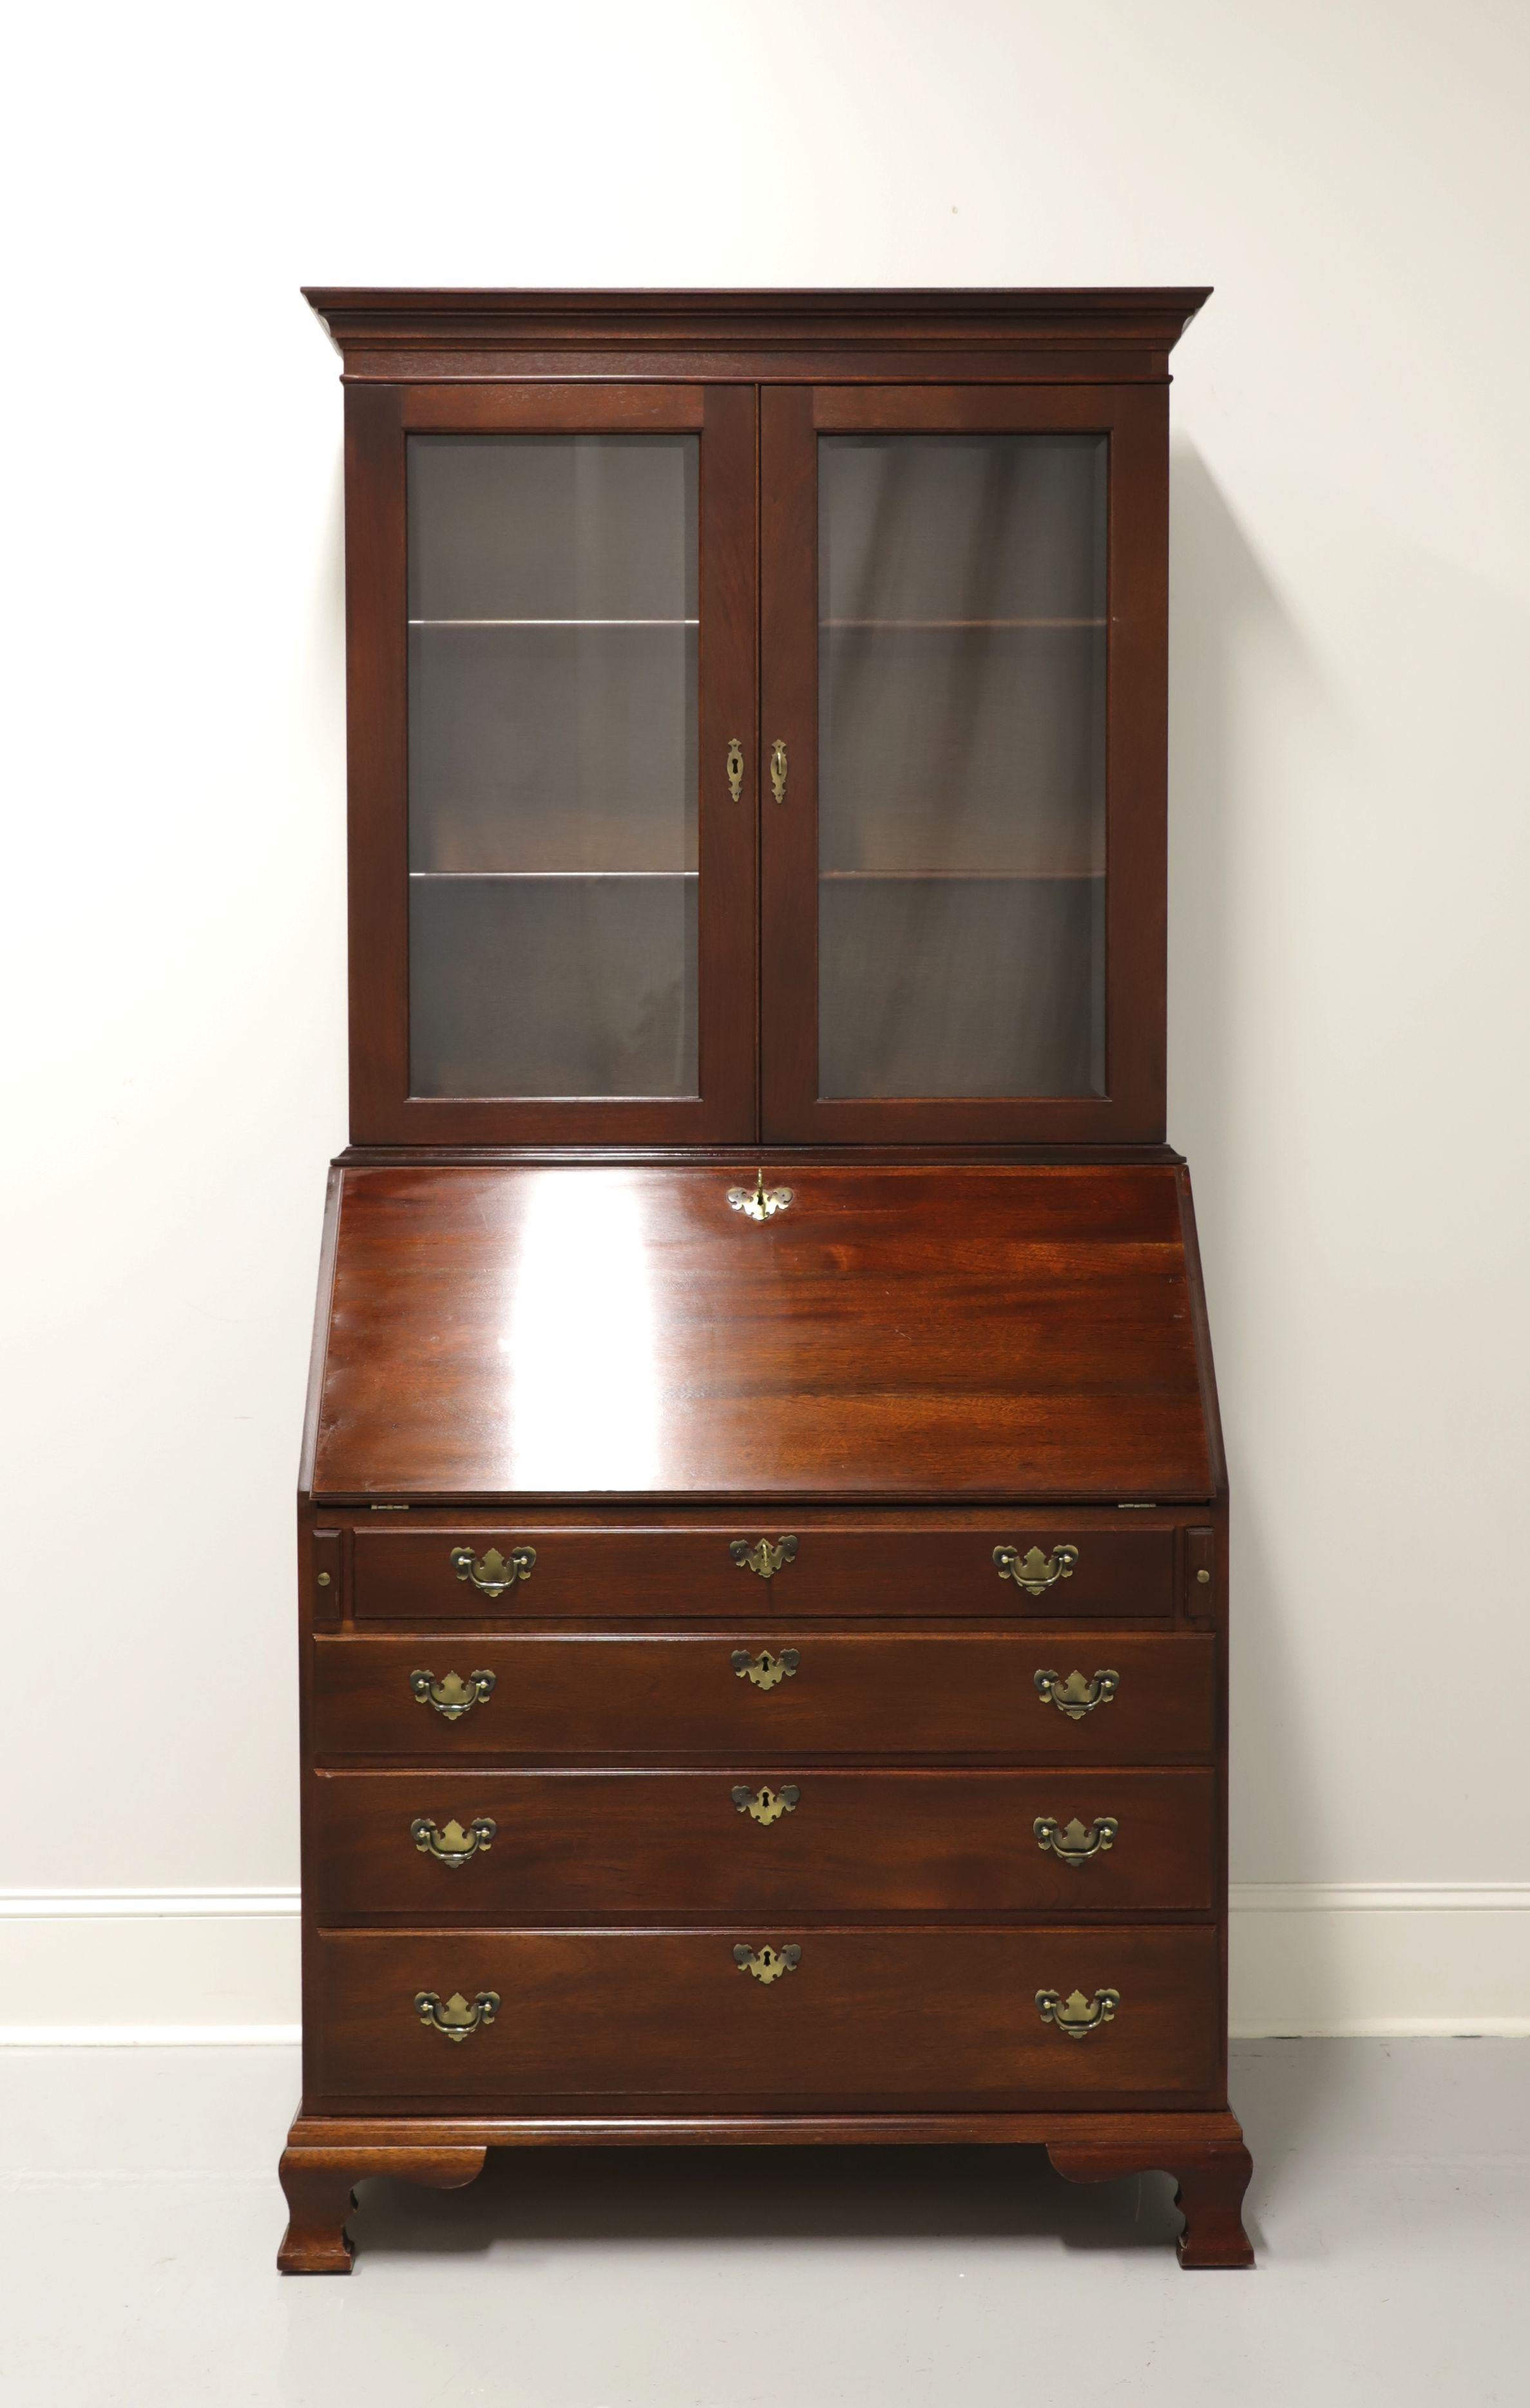 A stunning secretary desk with bookcase by top-quality furniture maker Craftique, in the style of early American John Hancock desks. Solid mahogany with brass hardware. Features upper bookcase with two fixed wooden shelves and is lockable. Lower